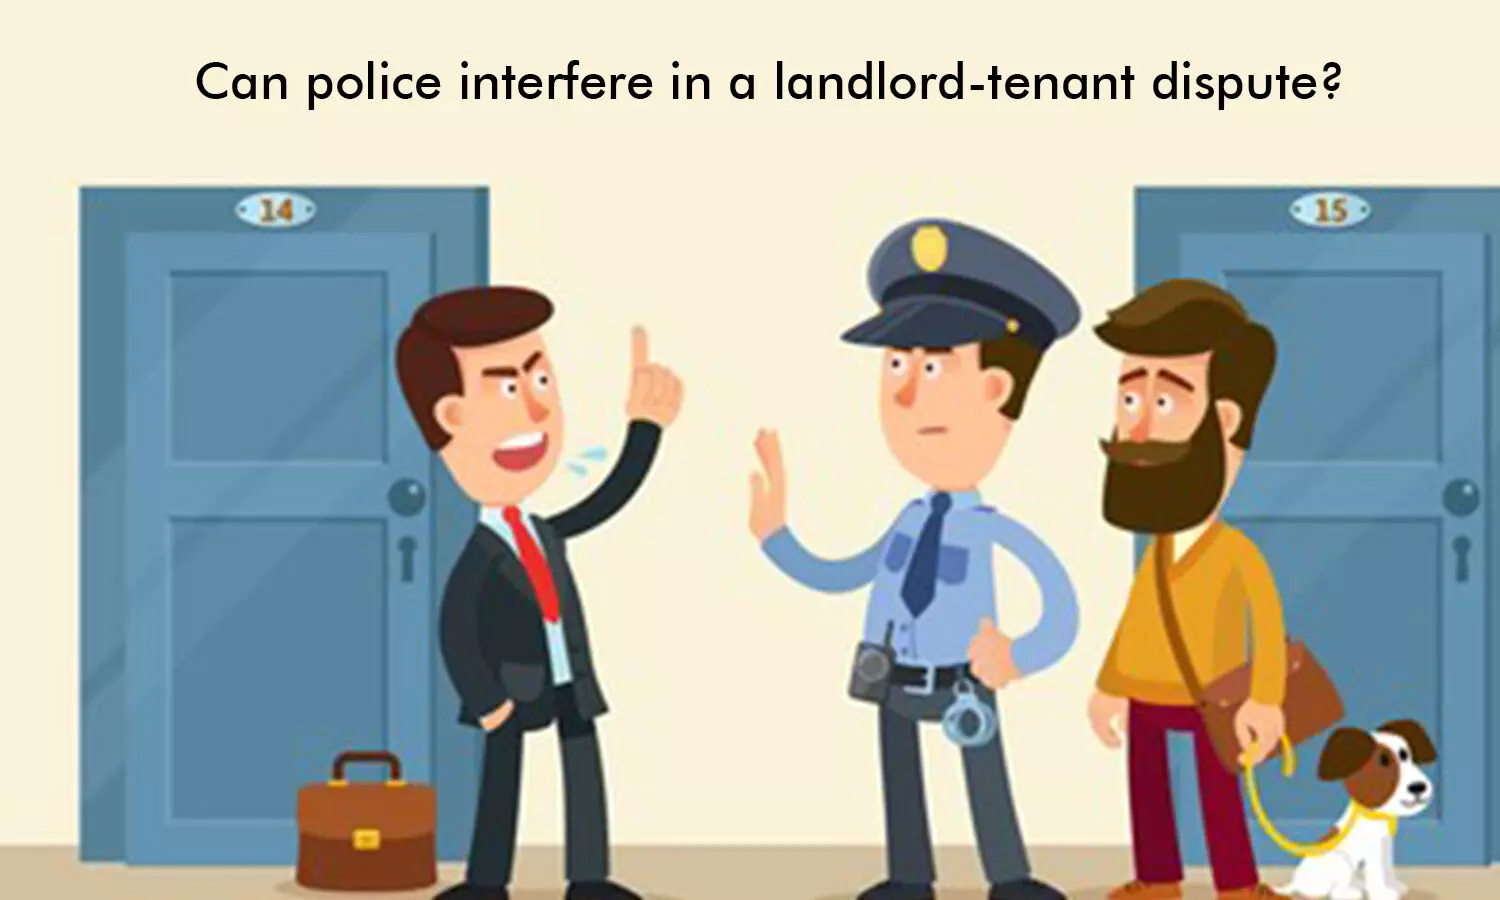 Can police interfere in a landlord-tenant dispute?